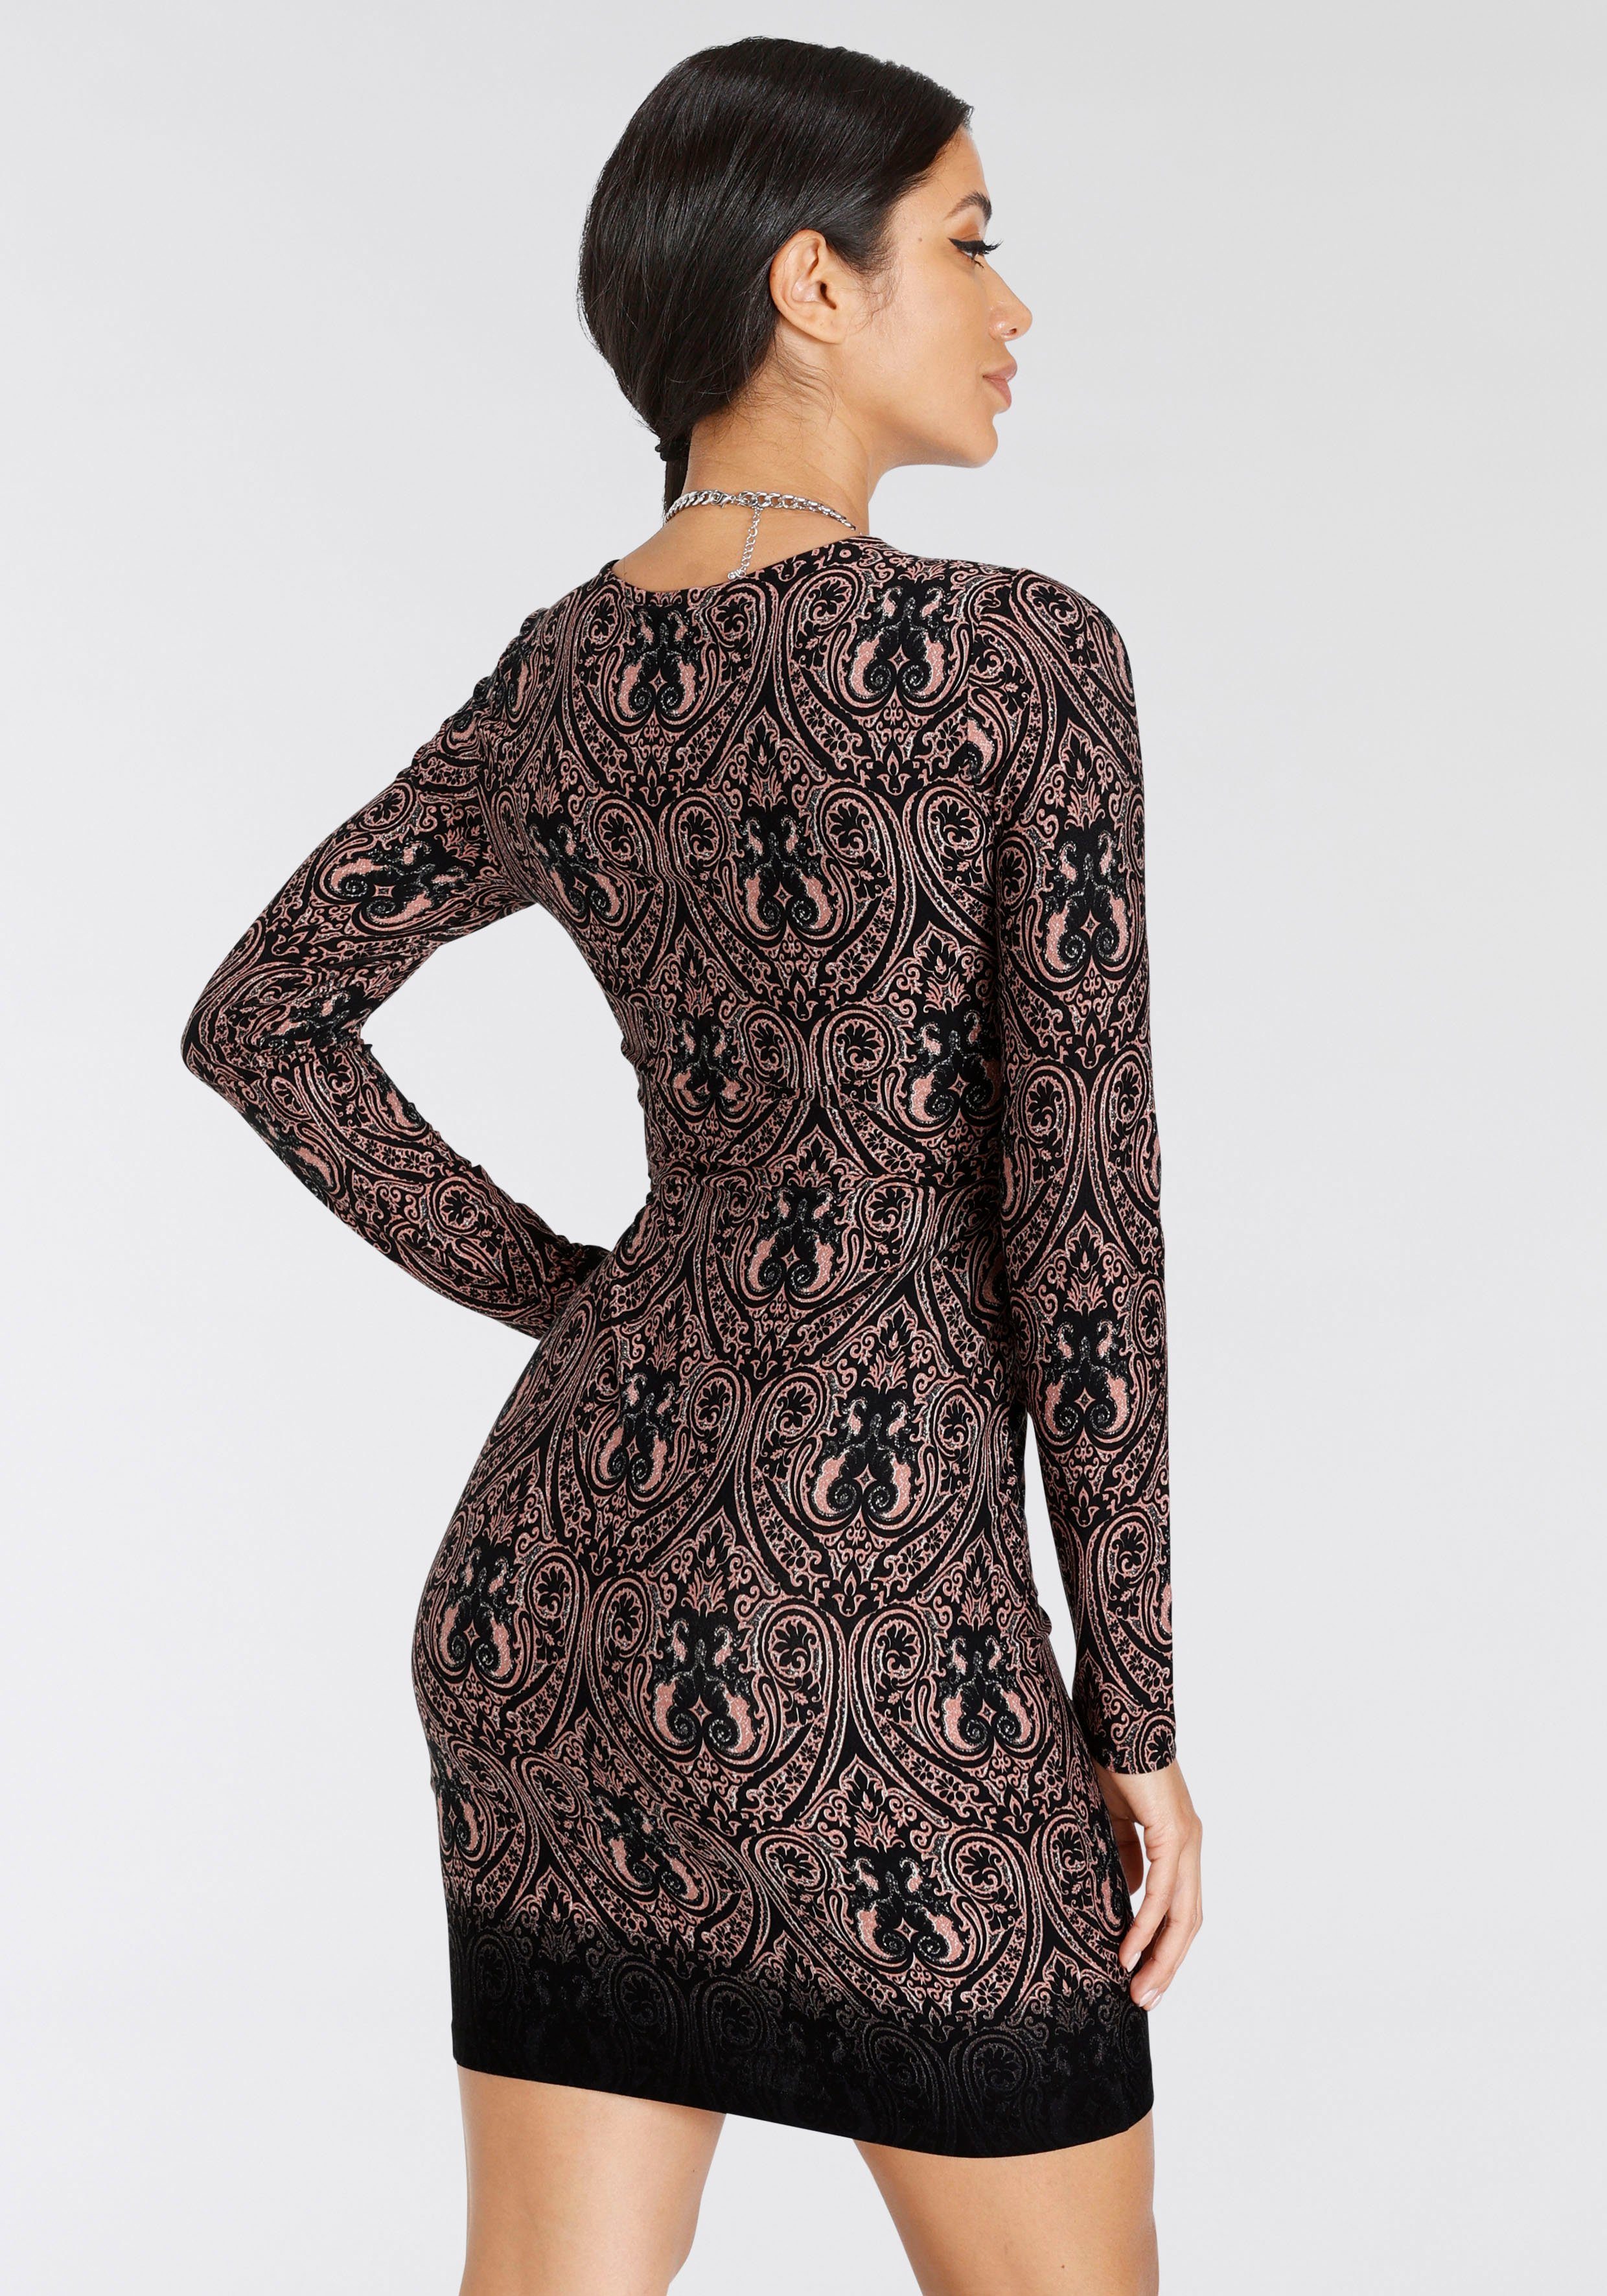 Melrose Jerseykleid Paisley-Muster Cut-Out mit und